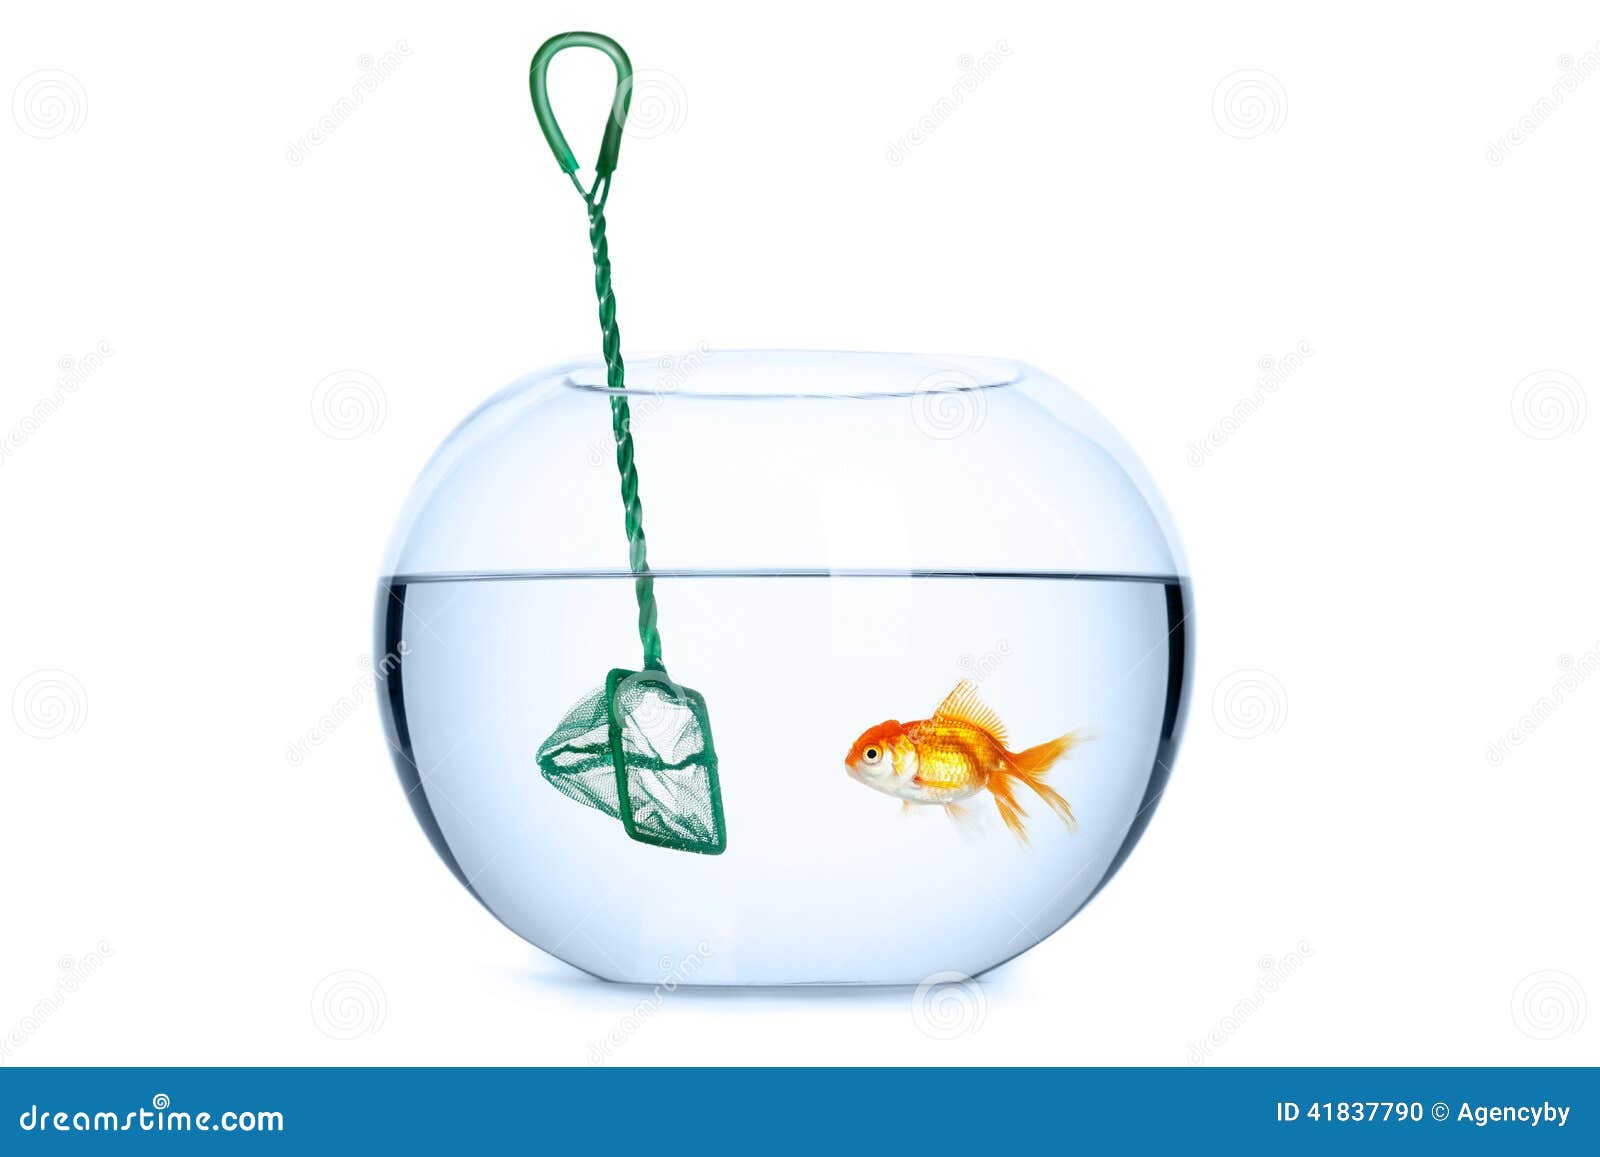 https://thumbs.dreamstime.com/z/goldfish-front-net-opportunity-to-fall-trap-isolated-white-background-business-concept-41837790.jpg